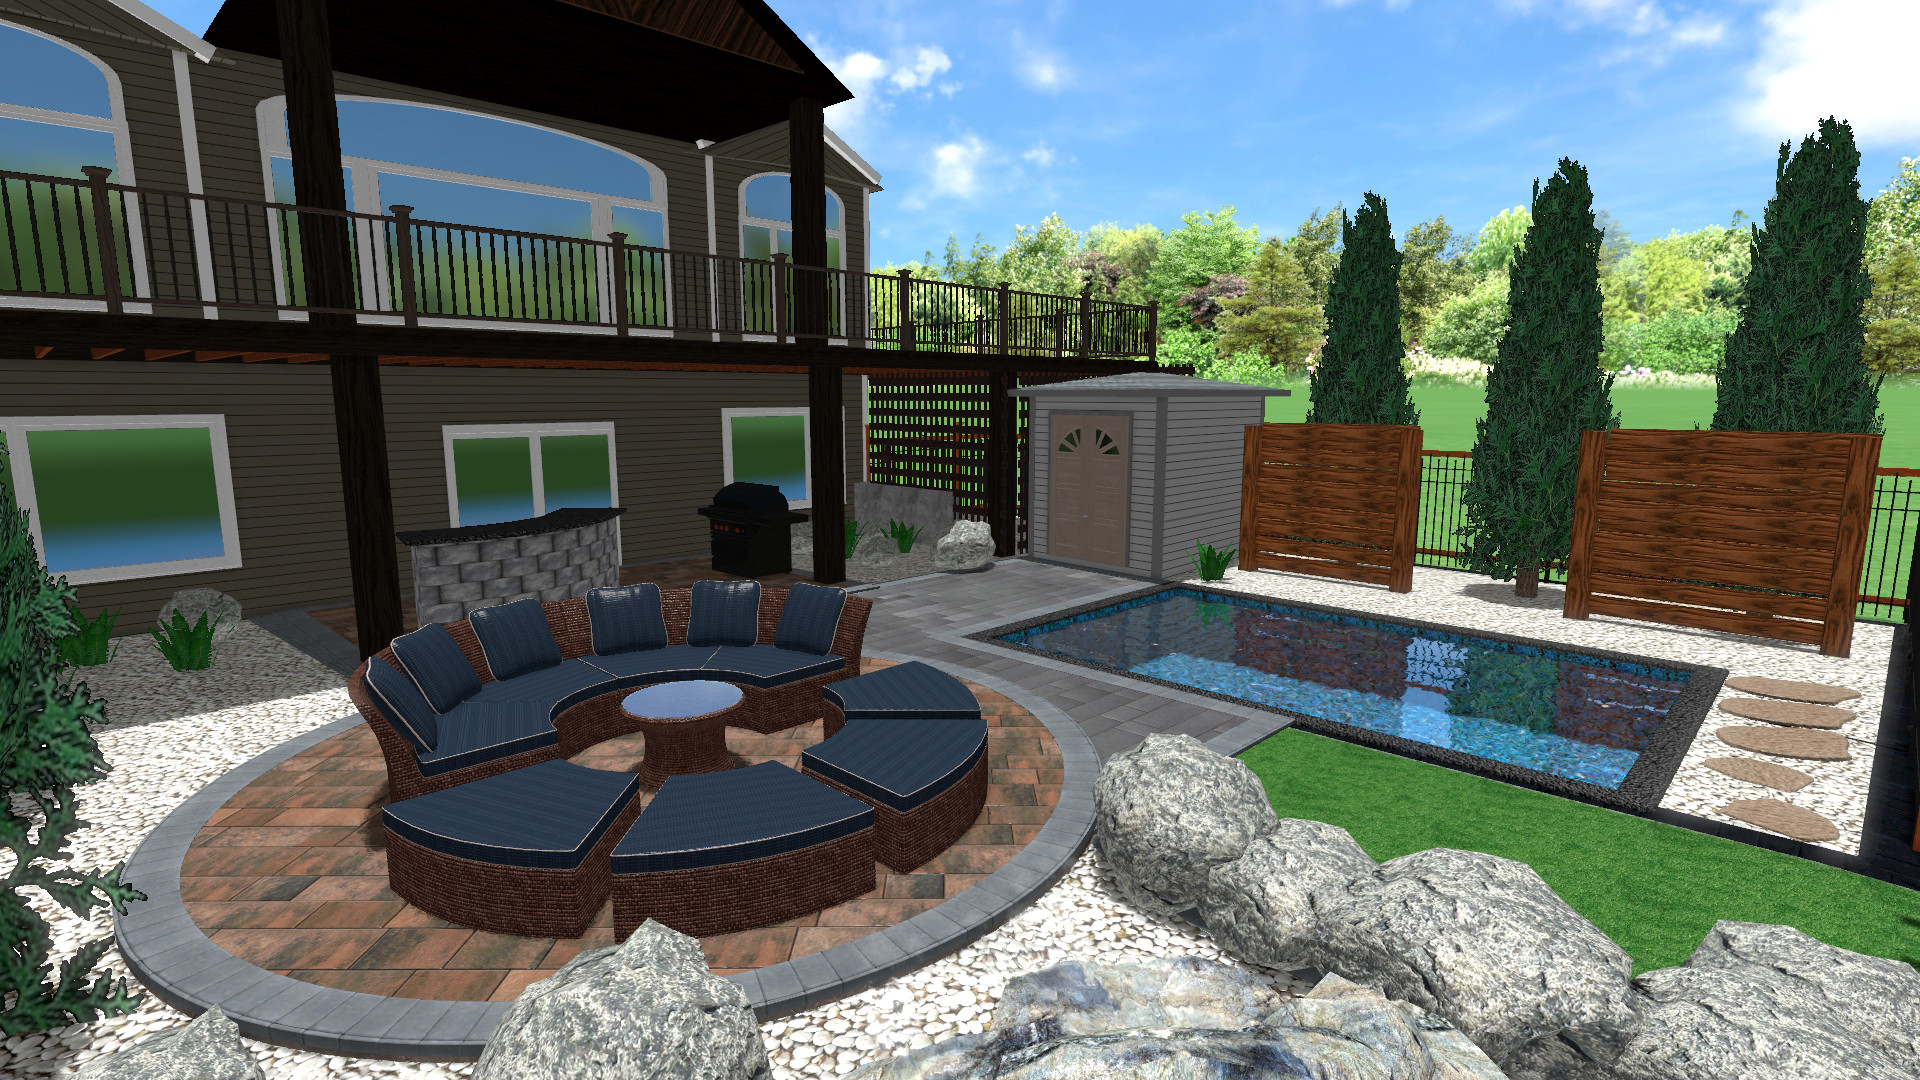 3D landscape design of Backyard pool deck with Barkman Concrete Bridgewood slabs, curved quarry stone bar, pool, and privacy screens